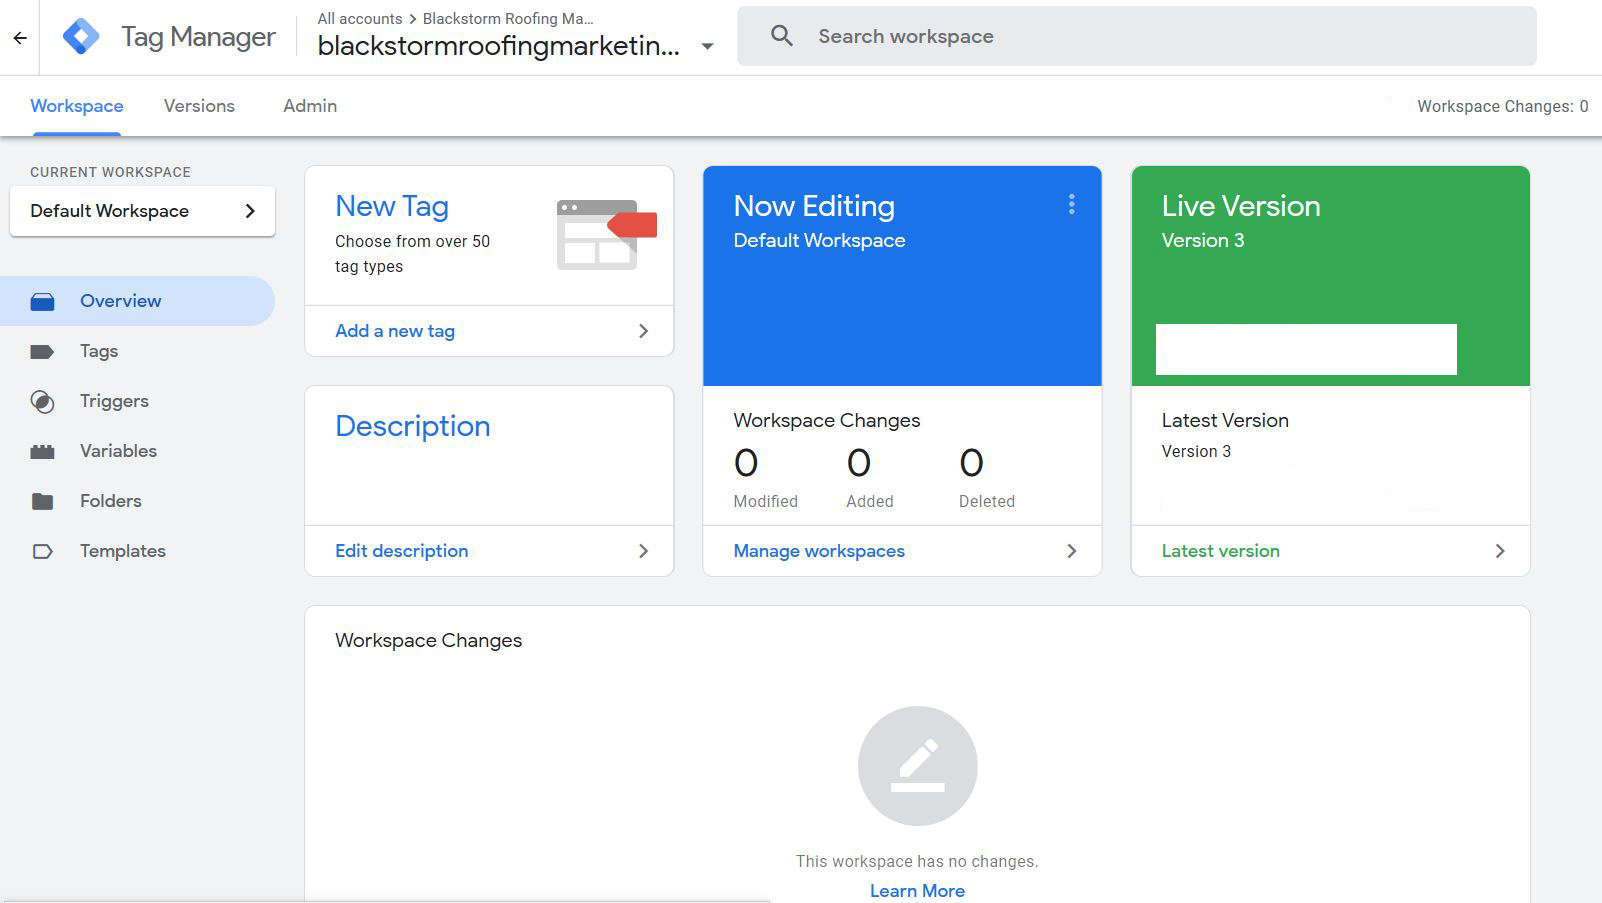 The Ultimate Google Tag Manager Guide for Roofing Contractors in 2020